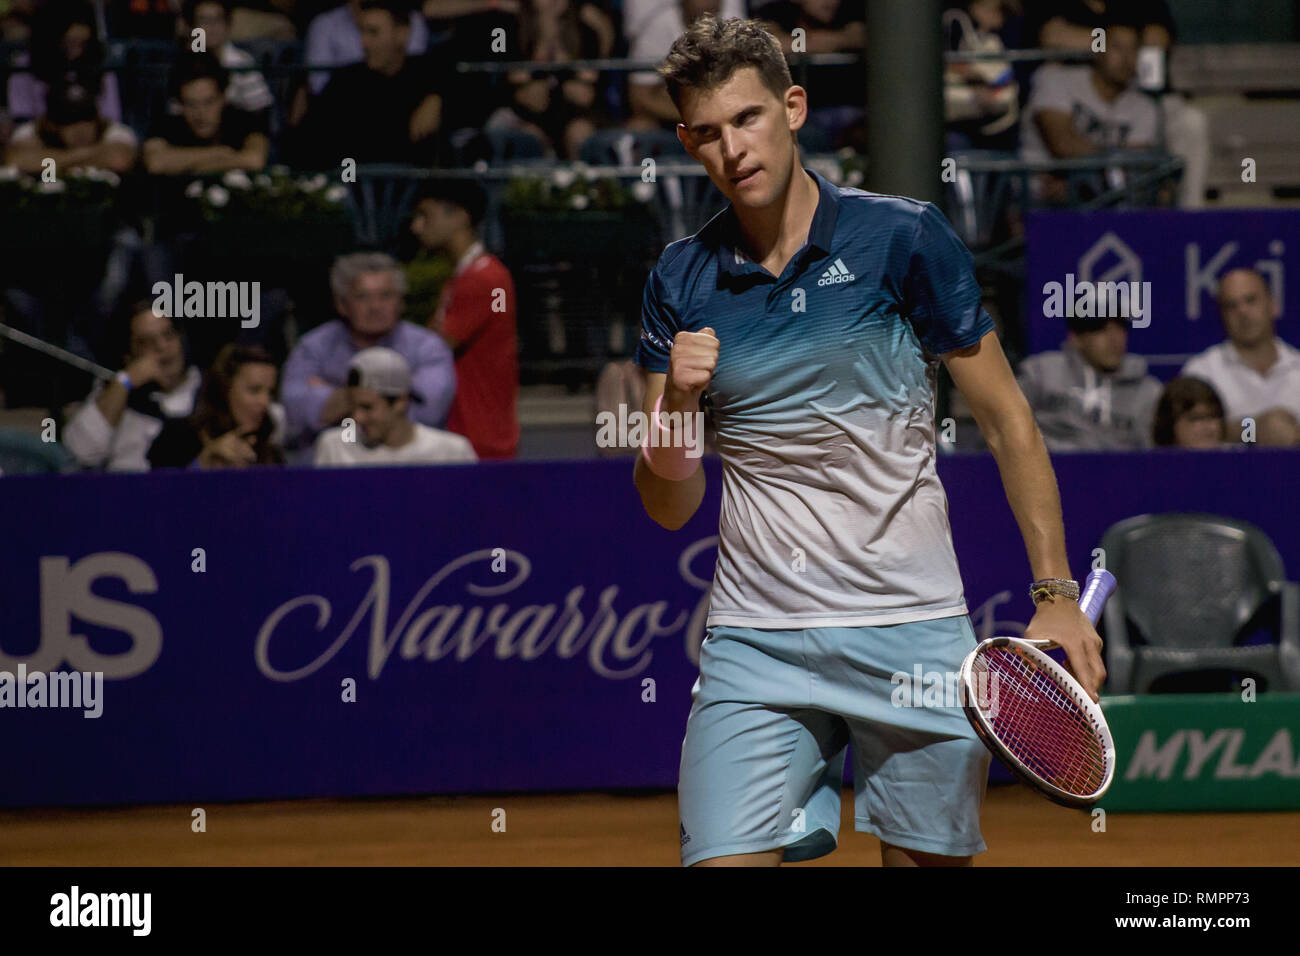 Buenos Aires, Federal Capital, Argentina. 15th Feb, 2019. The Austrian Dominic Thiem is in the semifinals of the Argentina Open 2019 after beating the Uruguayan player Pablo Cuevas 4-6; 6-4; 6-3. The favorite to take the trophy of the tournament will have to face the Argentine Diego Schwartzman who in turn defeated the Spanish Albert Ramos ViÃ±ola 6-1; 7-5. Credit: Roberto Almeida Aveledo/ZUMA Wire/Alamy Live News Stock Photo